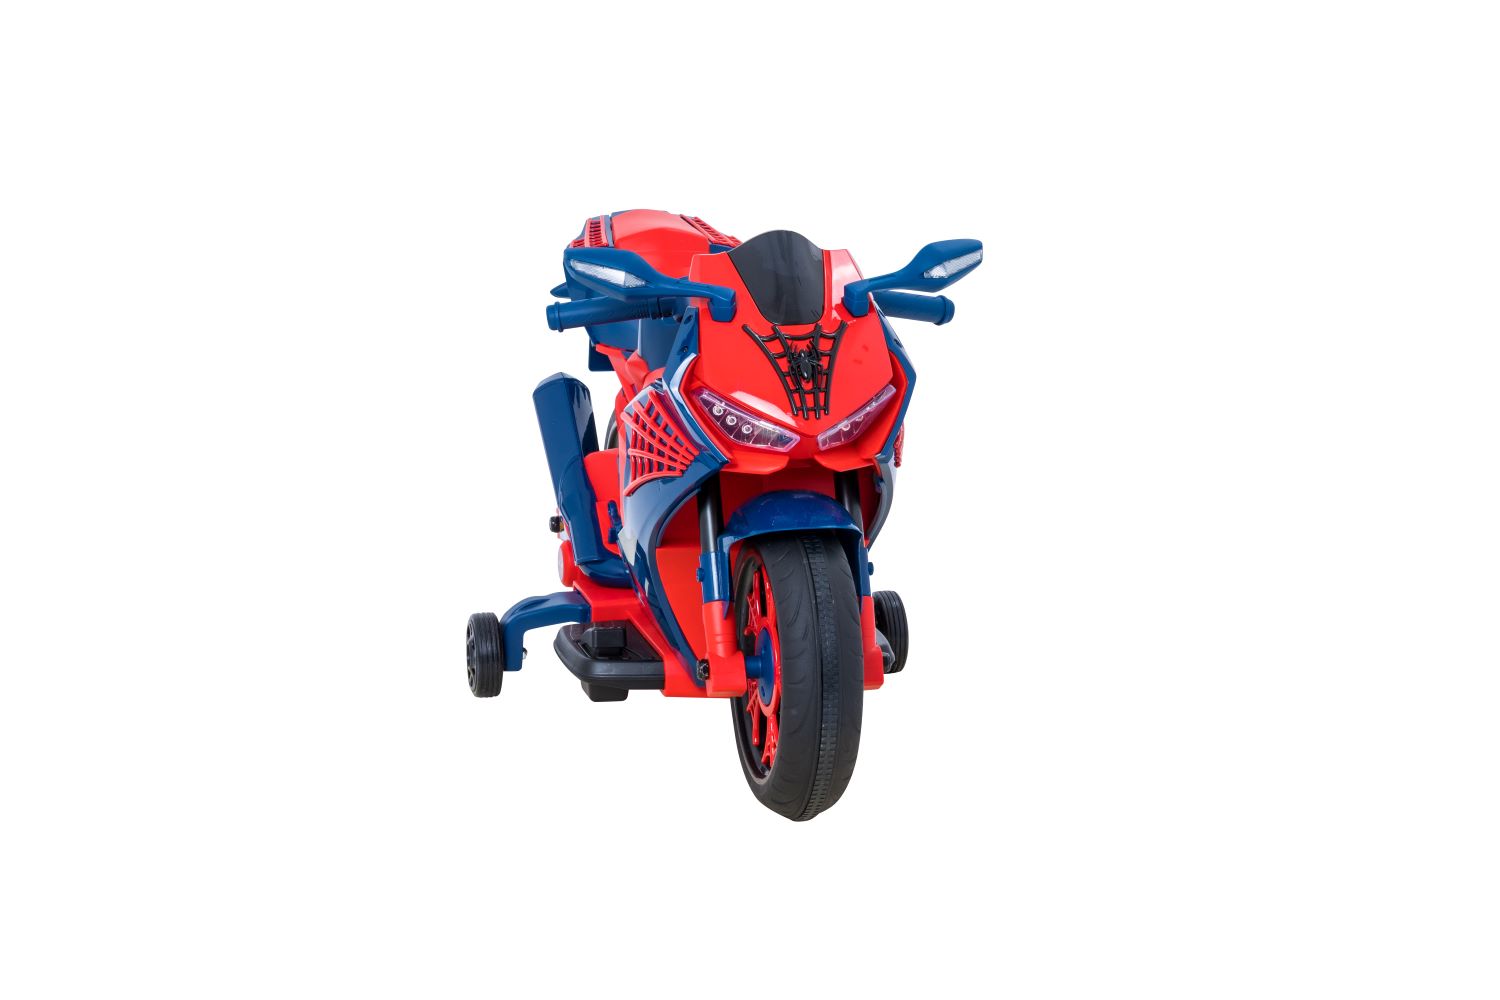 Spiderman 6V Motorcycle Ride On, for Kids, Ages 3+, Rechargeable Battery,  up to 65lbs 